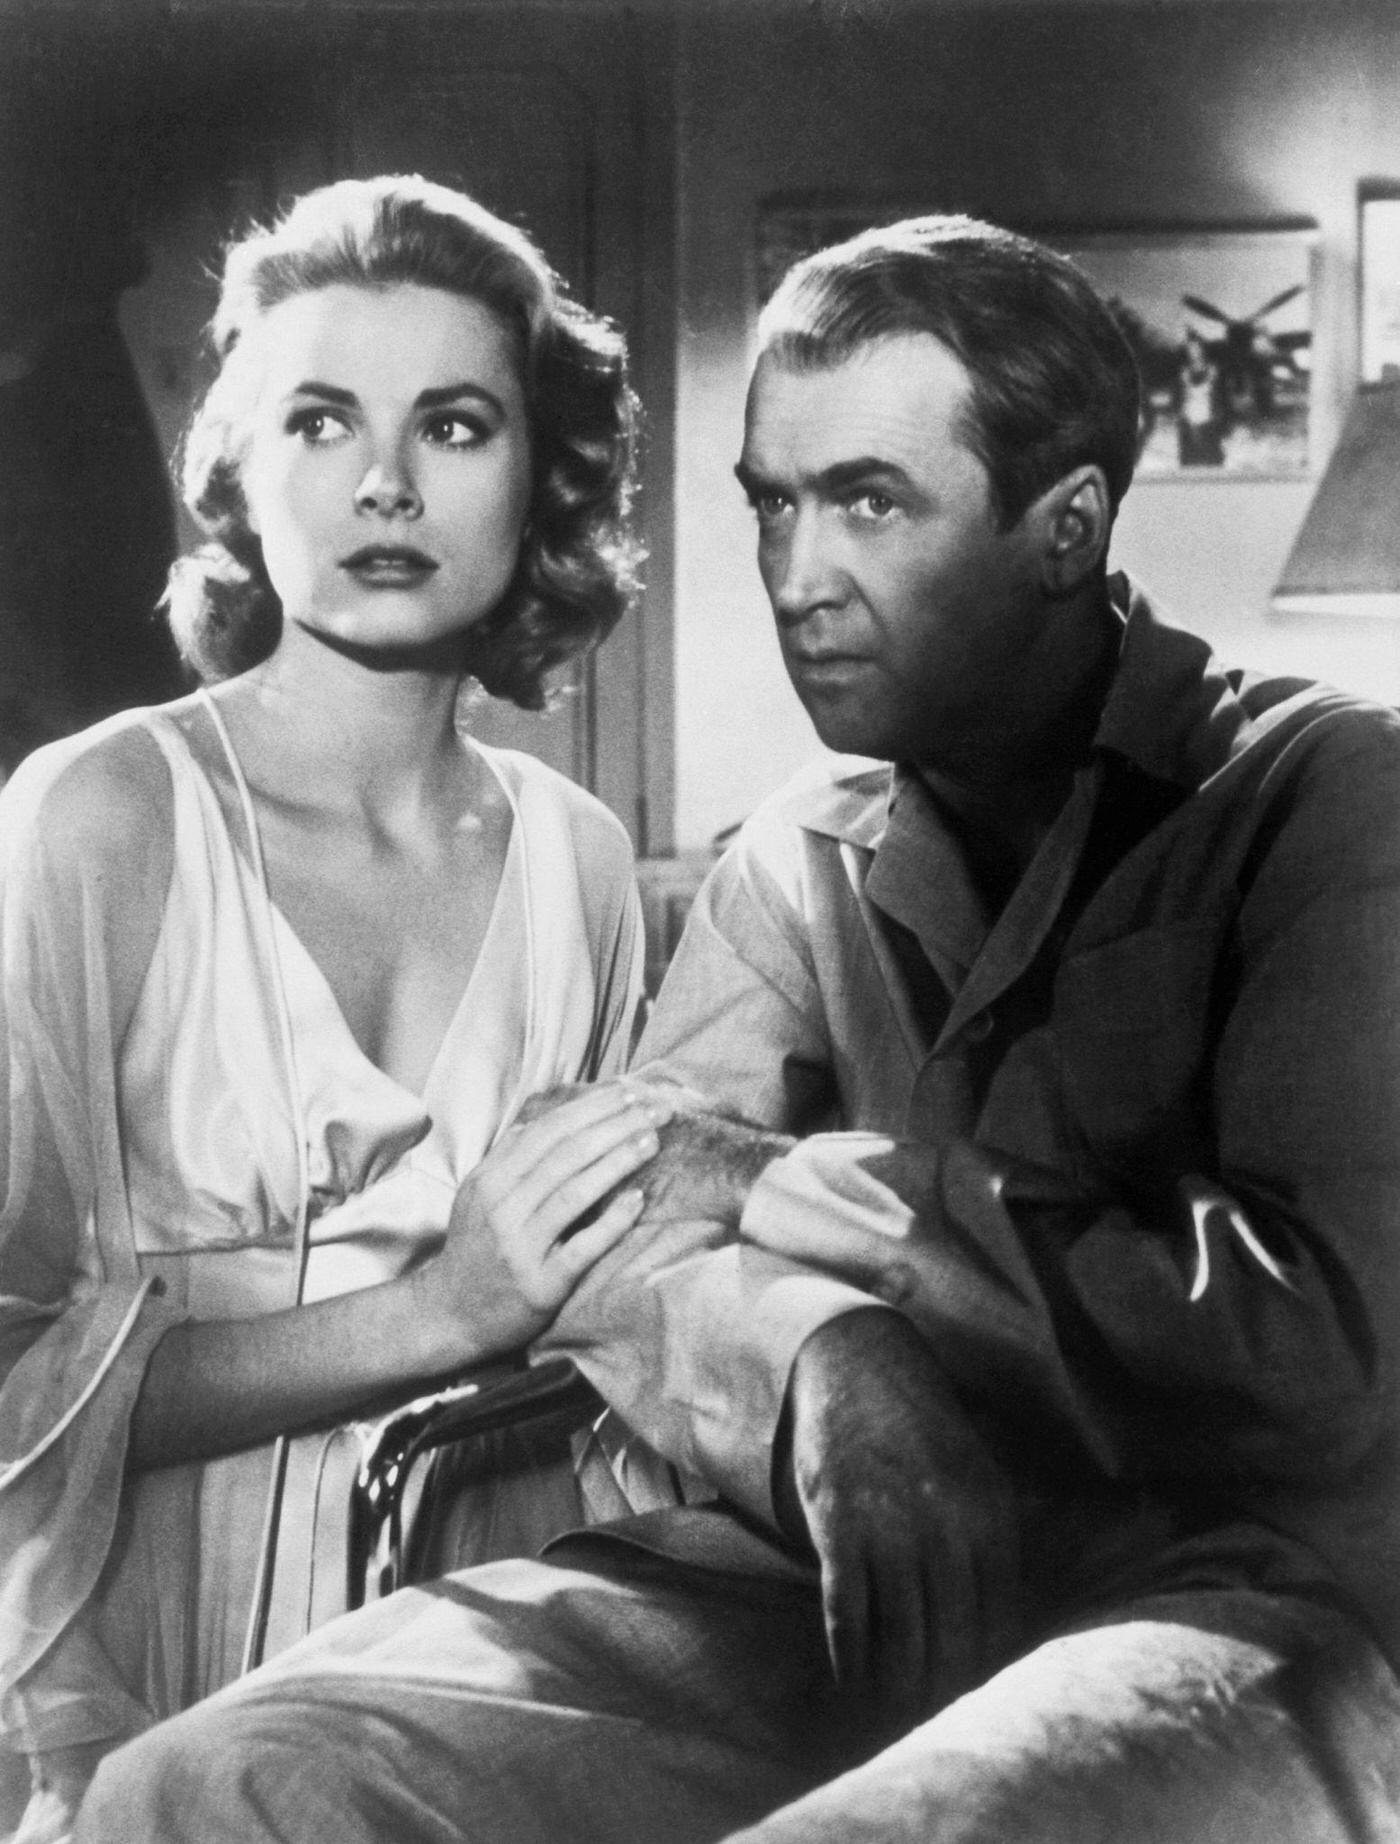 Grace Kelly and James Stewart in a scene from the movie "Rear Window" 1954